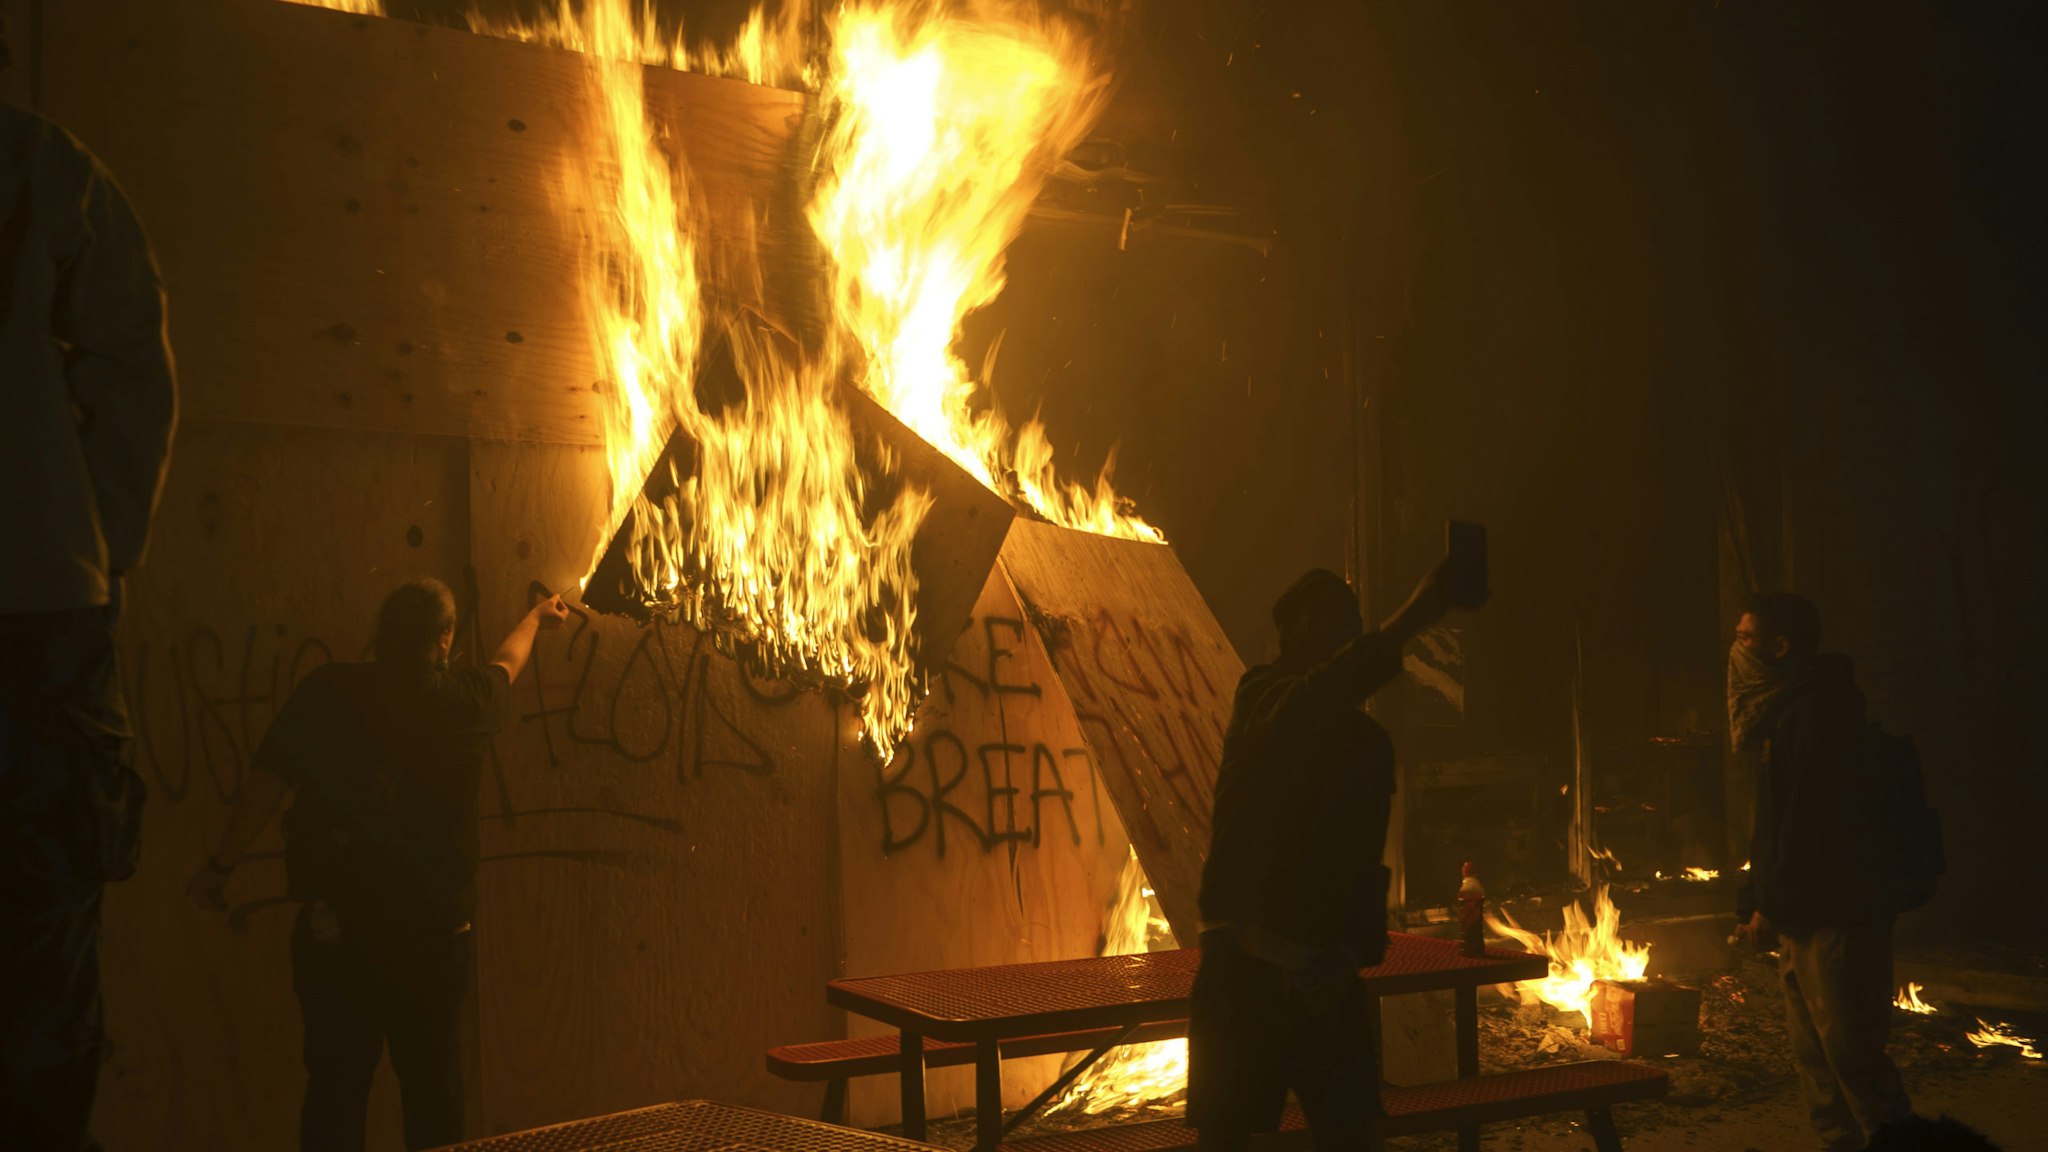 Building burns in Minneapolis, United States, on May 30, 2020 during a demonstration to call for justice for George Floyd, a black man who died while in custody of the Minneapolis police. Curfews were imposed in major US cities Saturday as clashes over police brutality escalated across America.